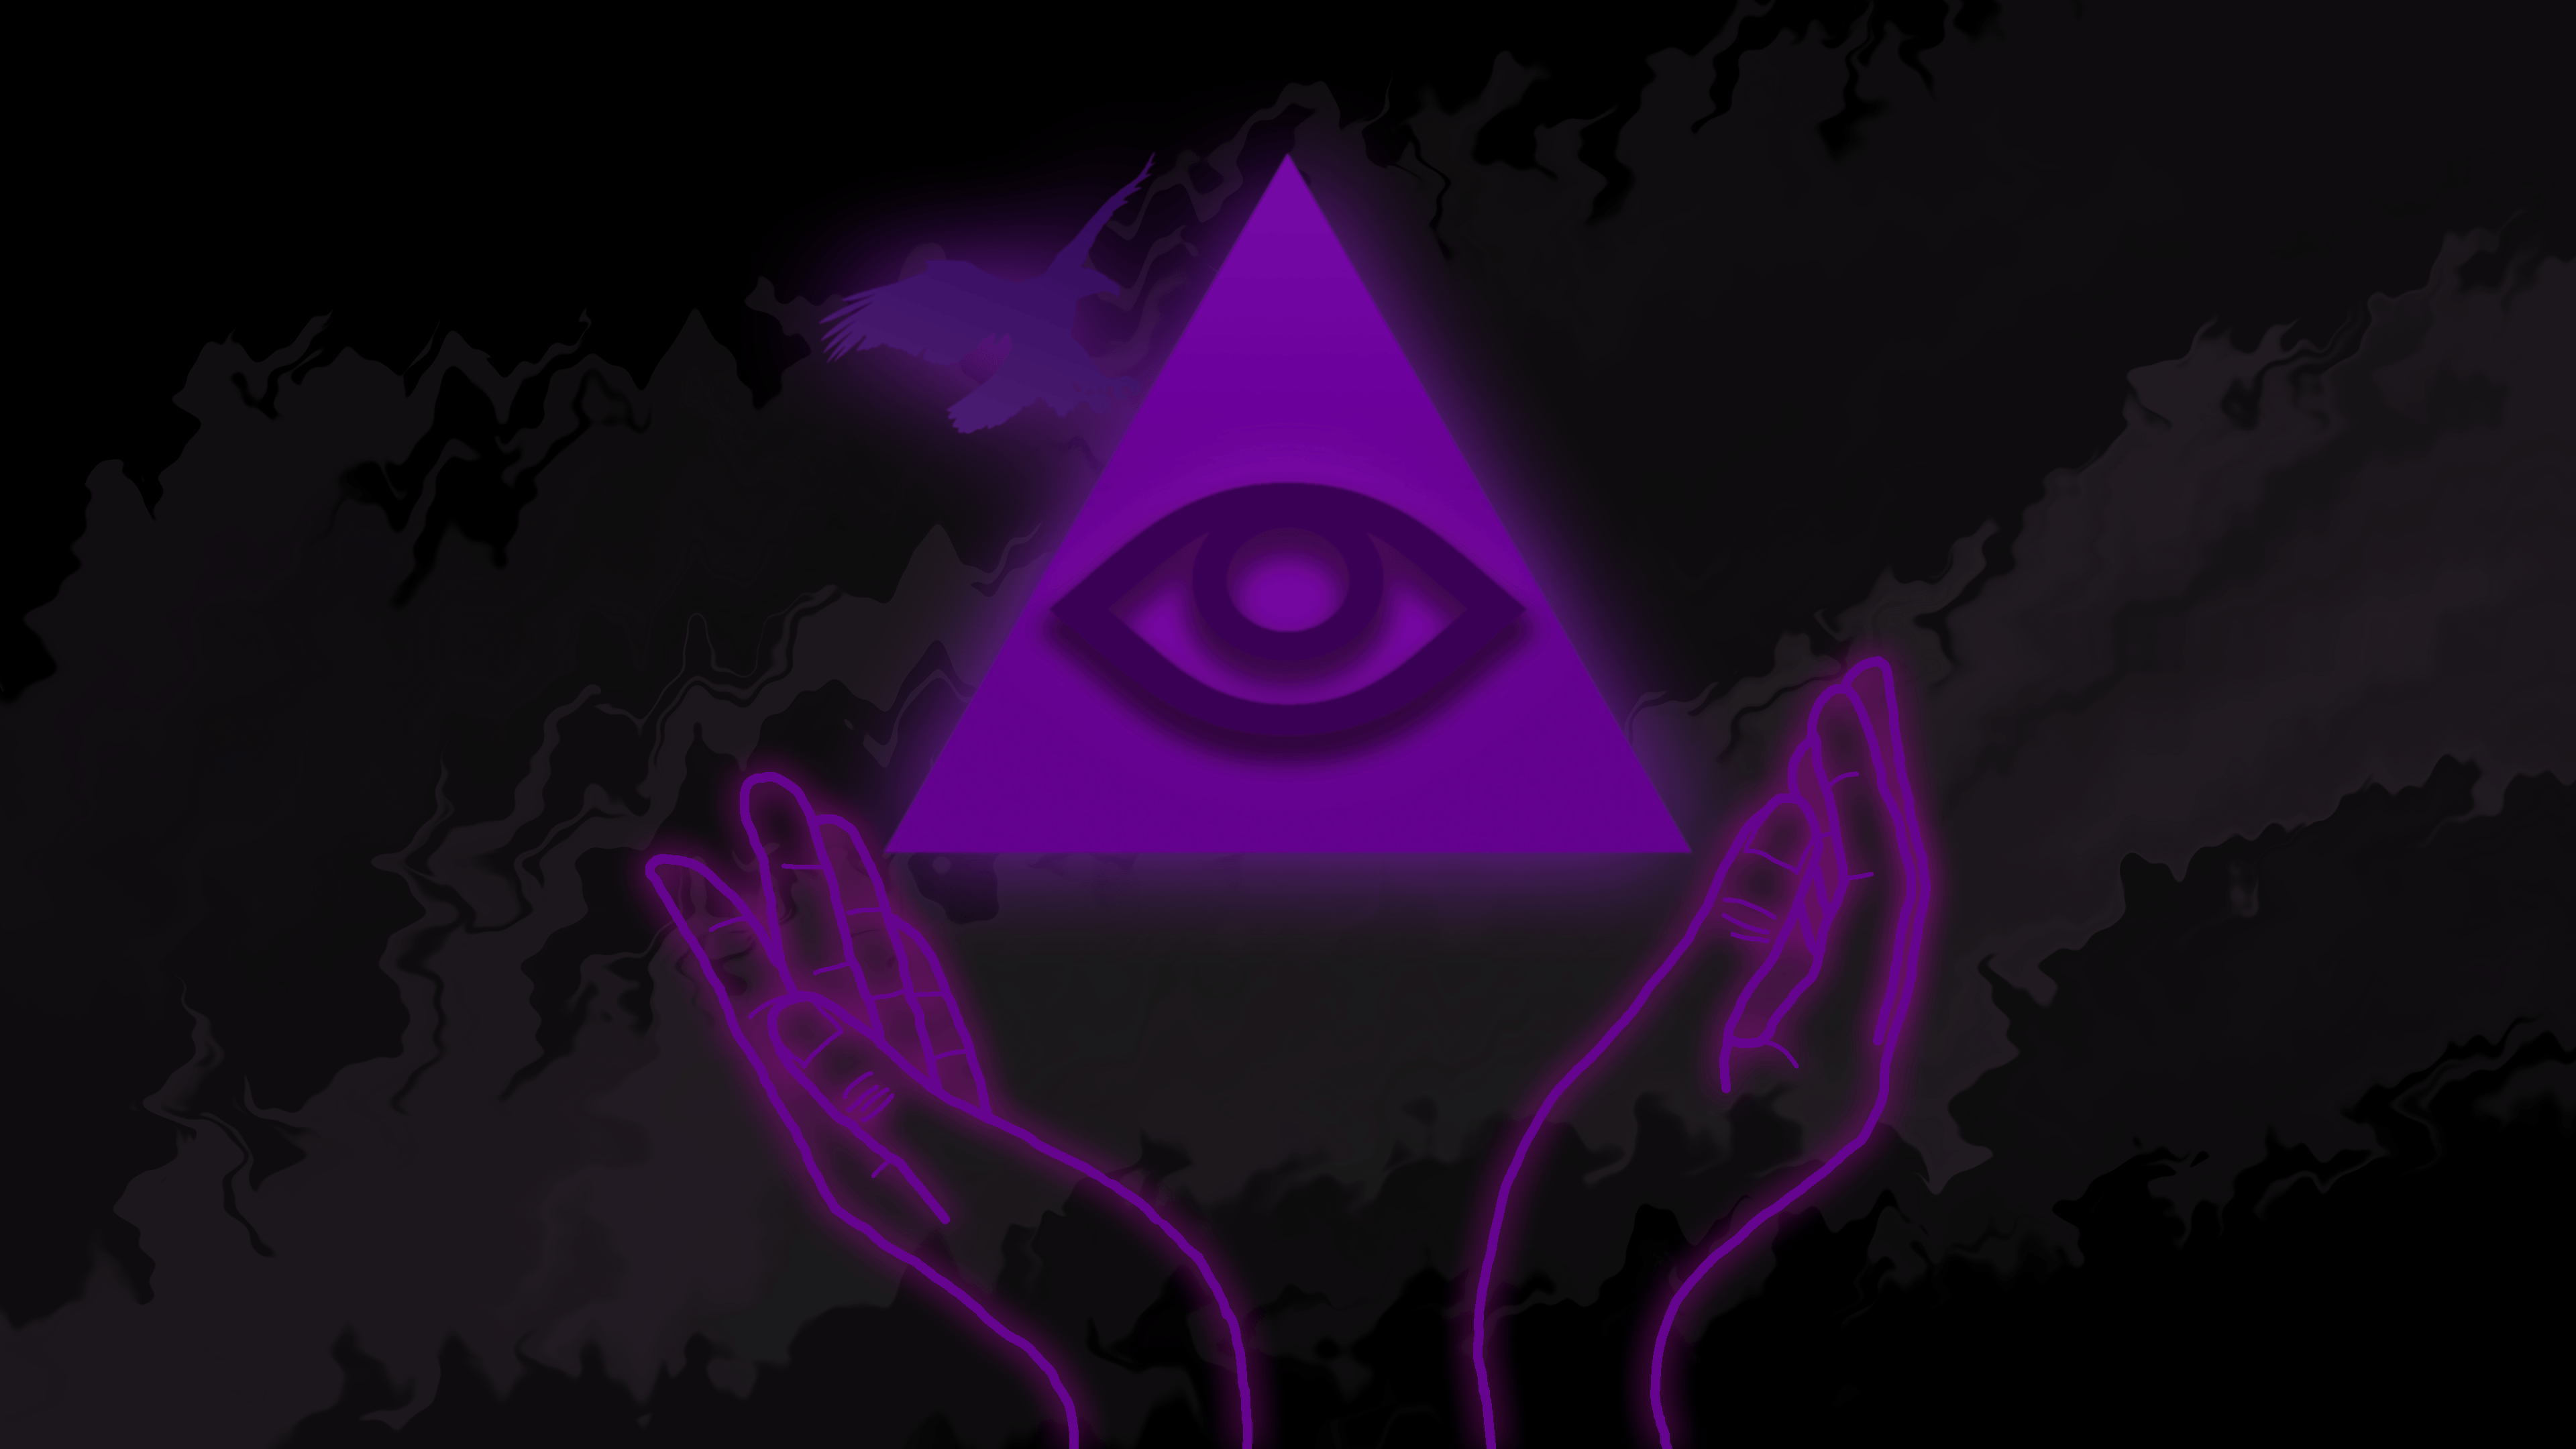 All Seeing Eye w/ Hands and Eagle Wallpaper [4k]